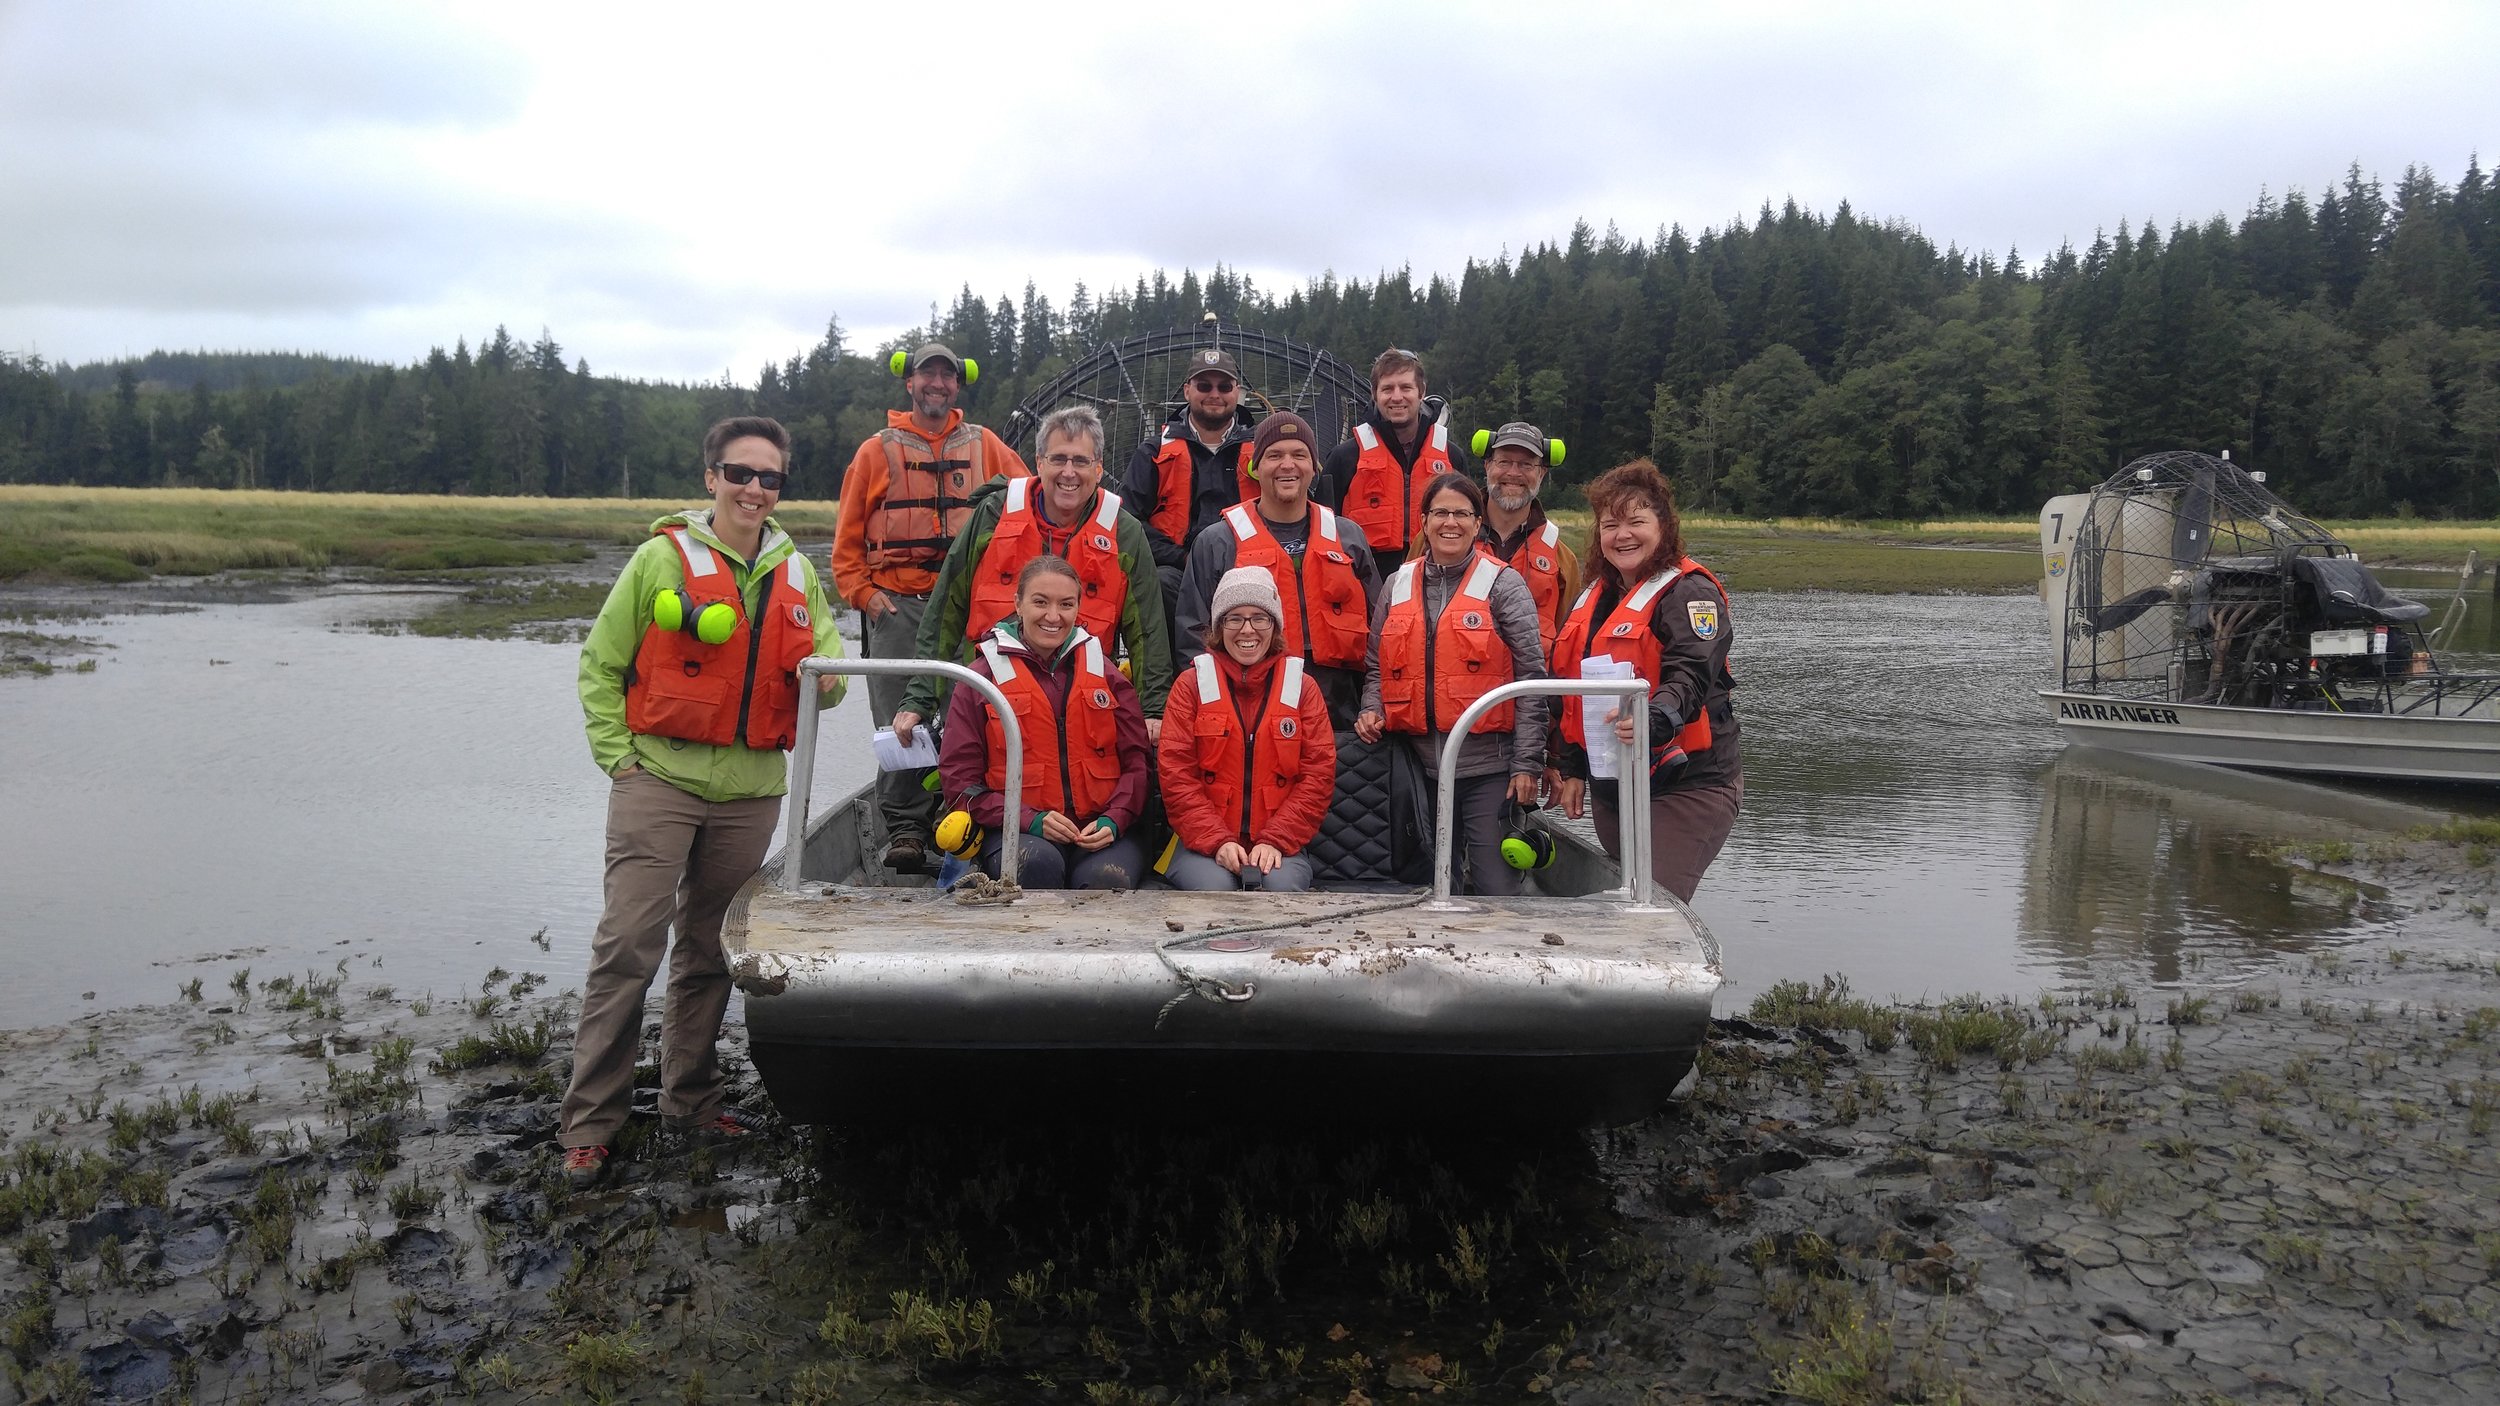  Tour participants got to experience the incredible restoration of Willapa Bay in the best way – on air boats. &nbsp;Ear protection was essential! Photo © Jessica Helsley 